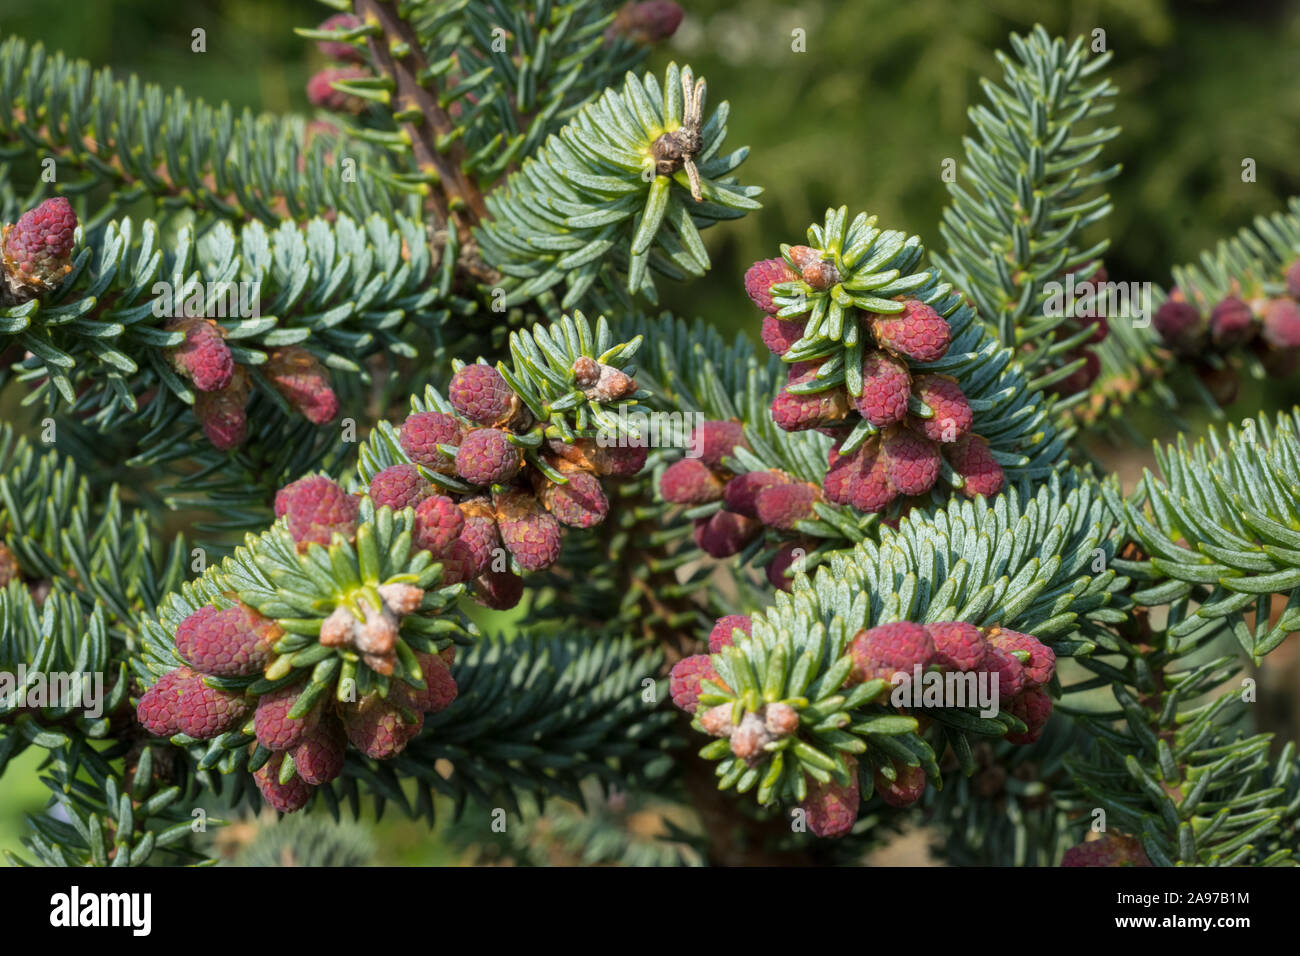 Abies pinsapo (spanish fir) with decorative purple red pollen in a botanical garden Stock Photo